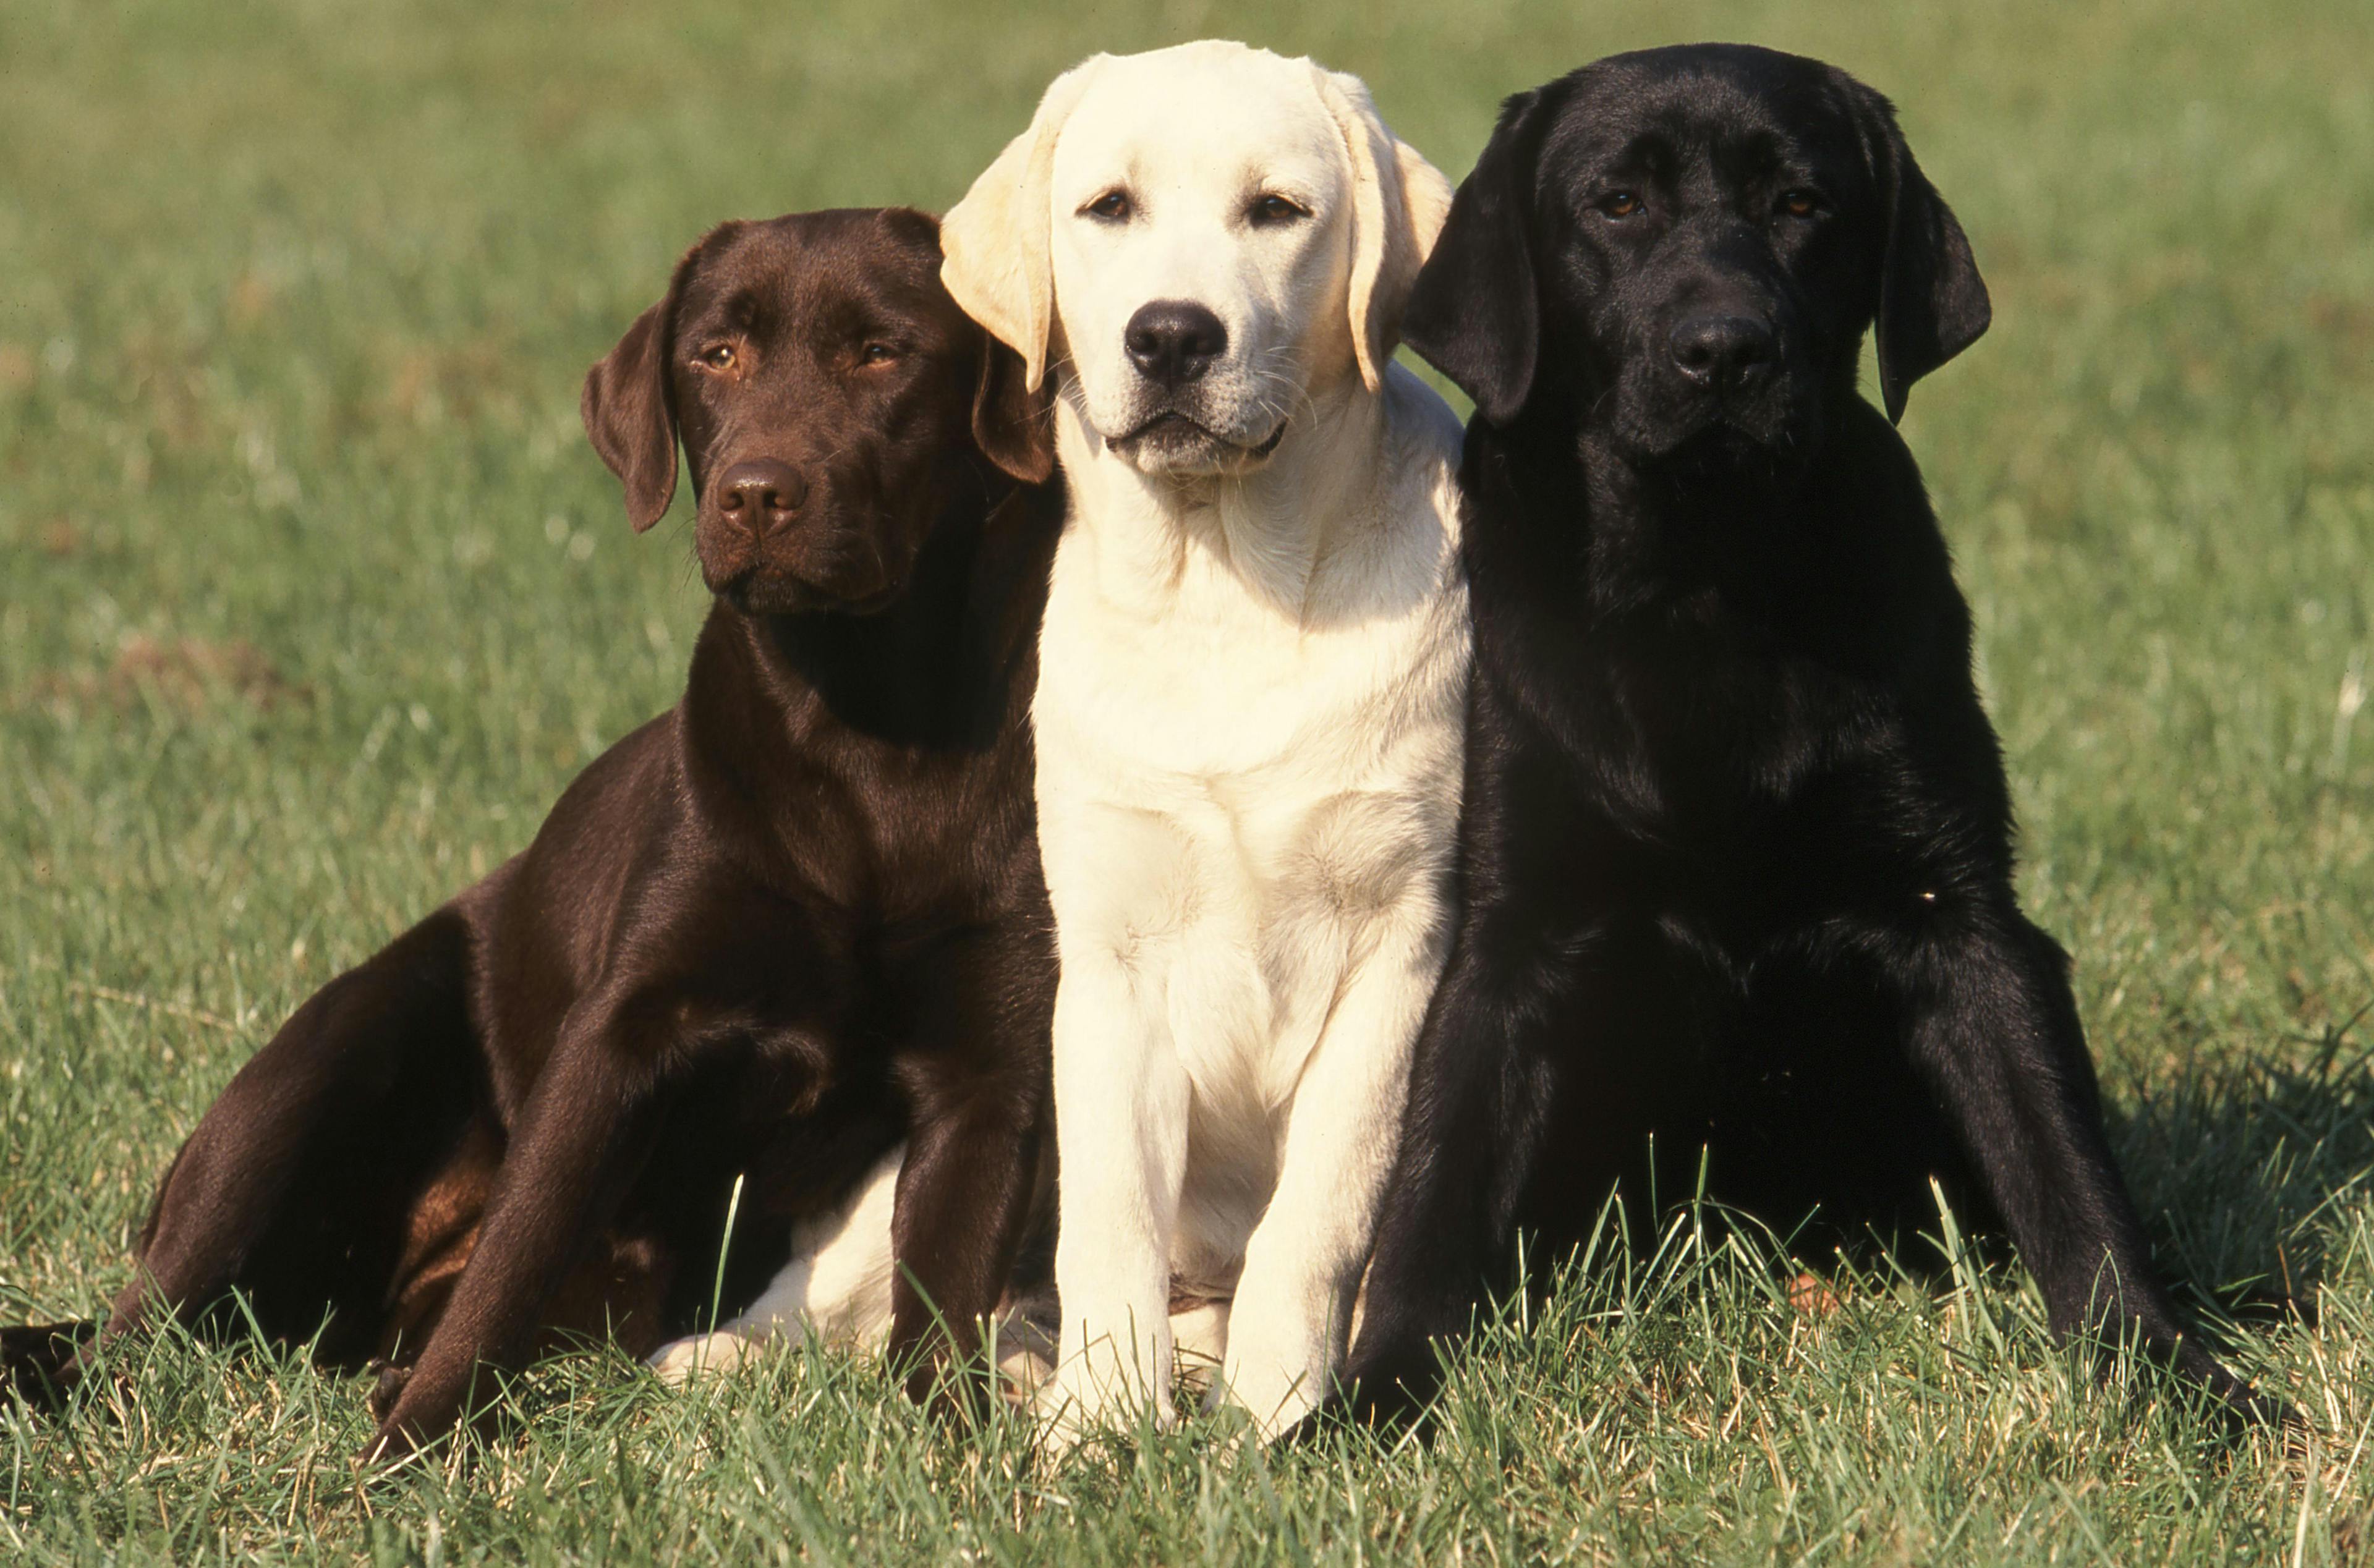 Retrievers have a mutation that makes them hungrier, study discovers